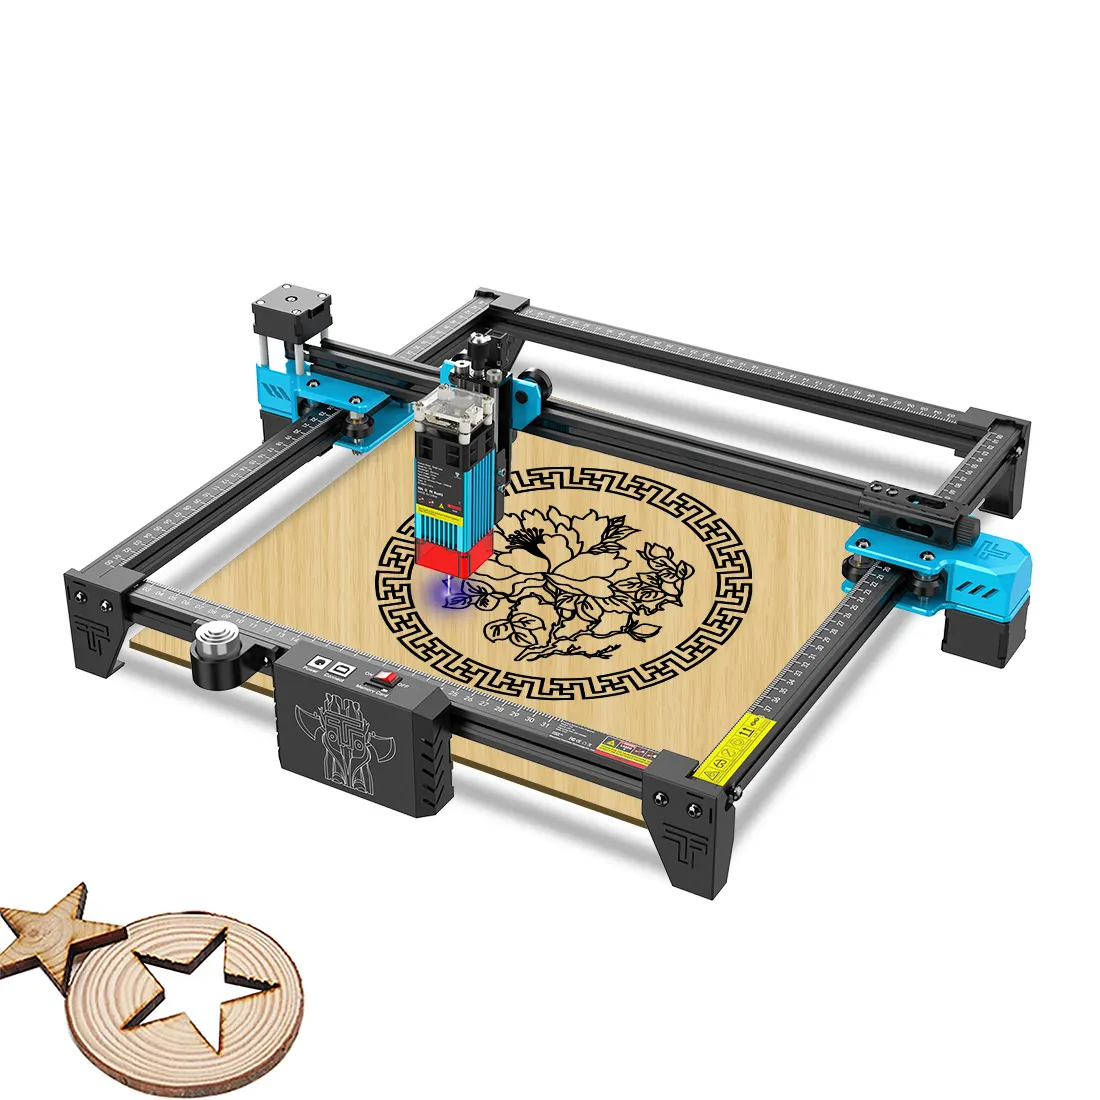 NEW Arrival TTS 5.5w Laser Cutting Machine CNC Routers, Laser cutter engraver 15w 80w Mini Laser Engraving Machines